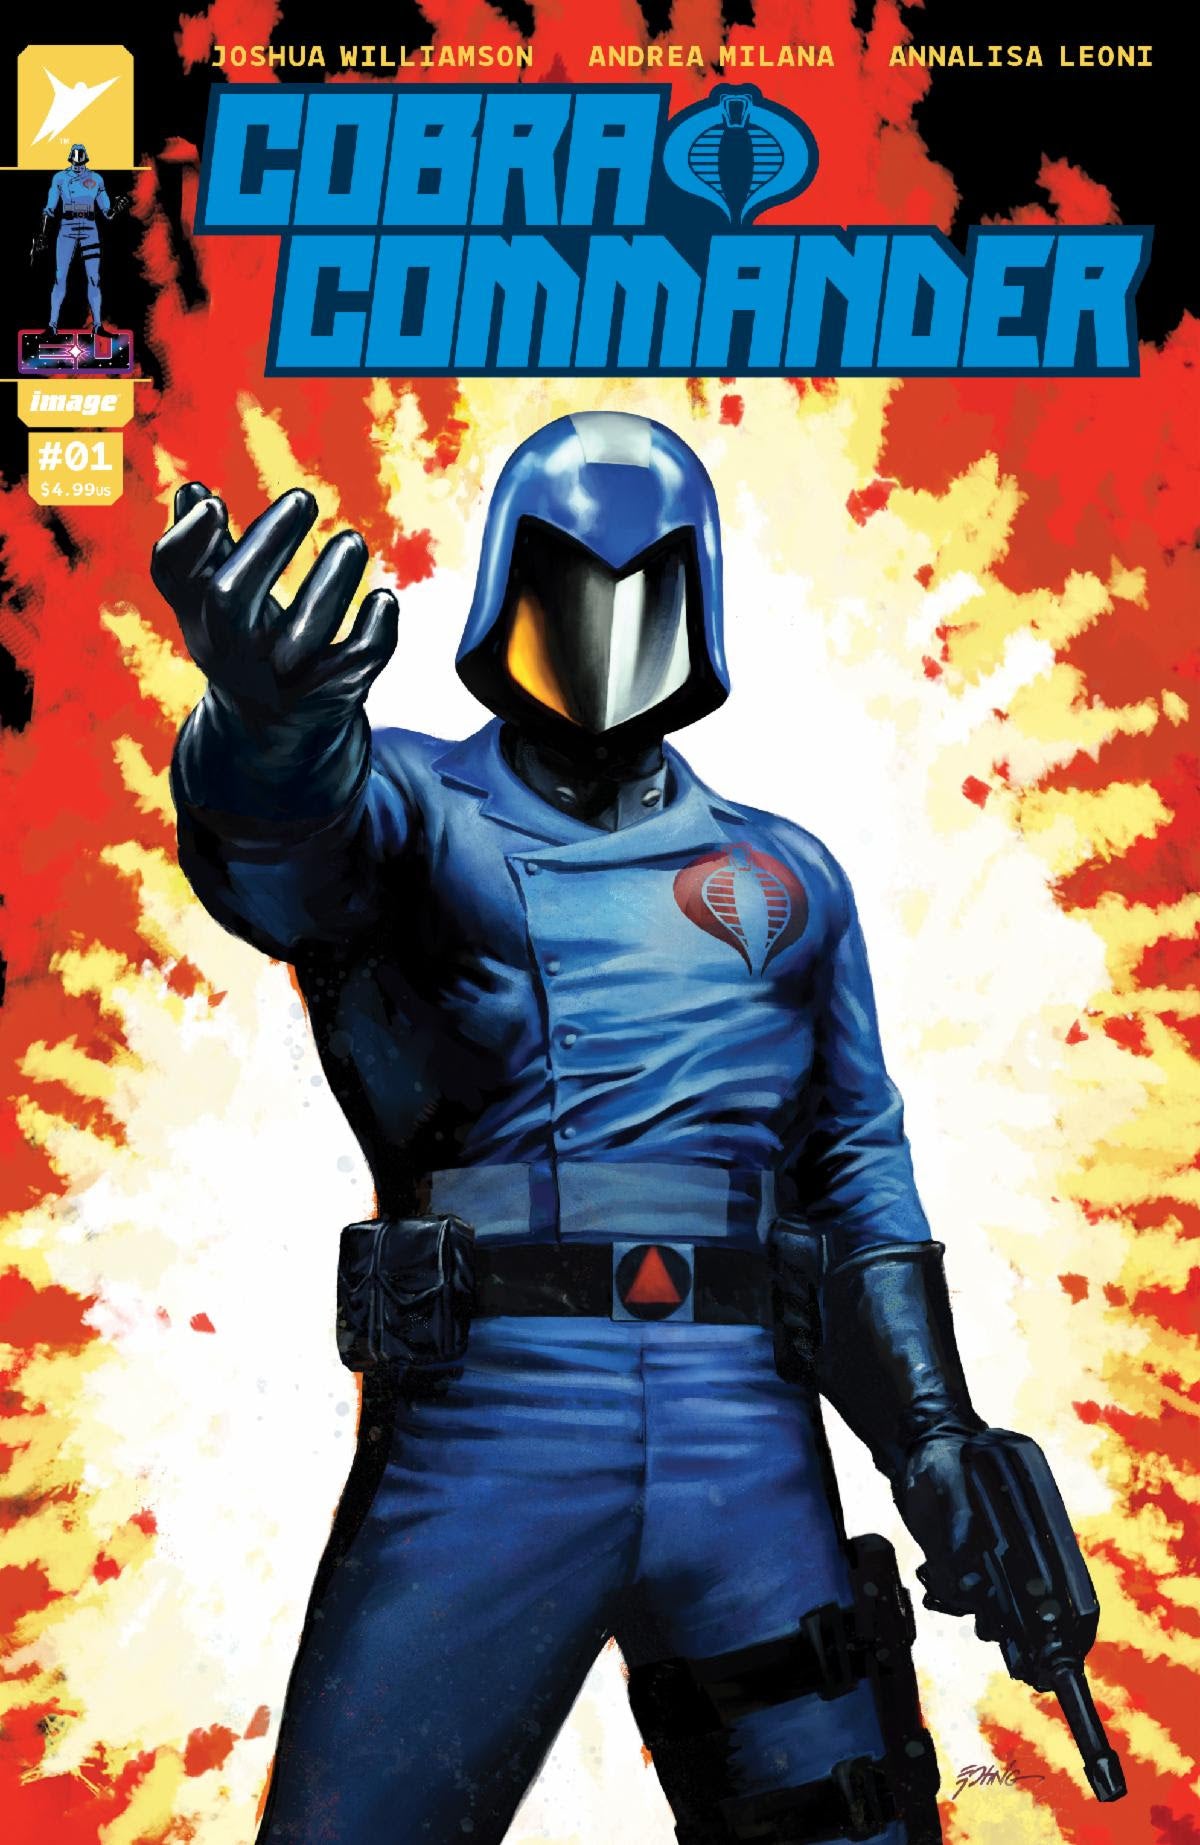 COBRA COMMANDER #1 Cover D (1:25 Copy Incentive) by Steve Epting